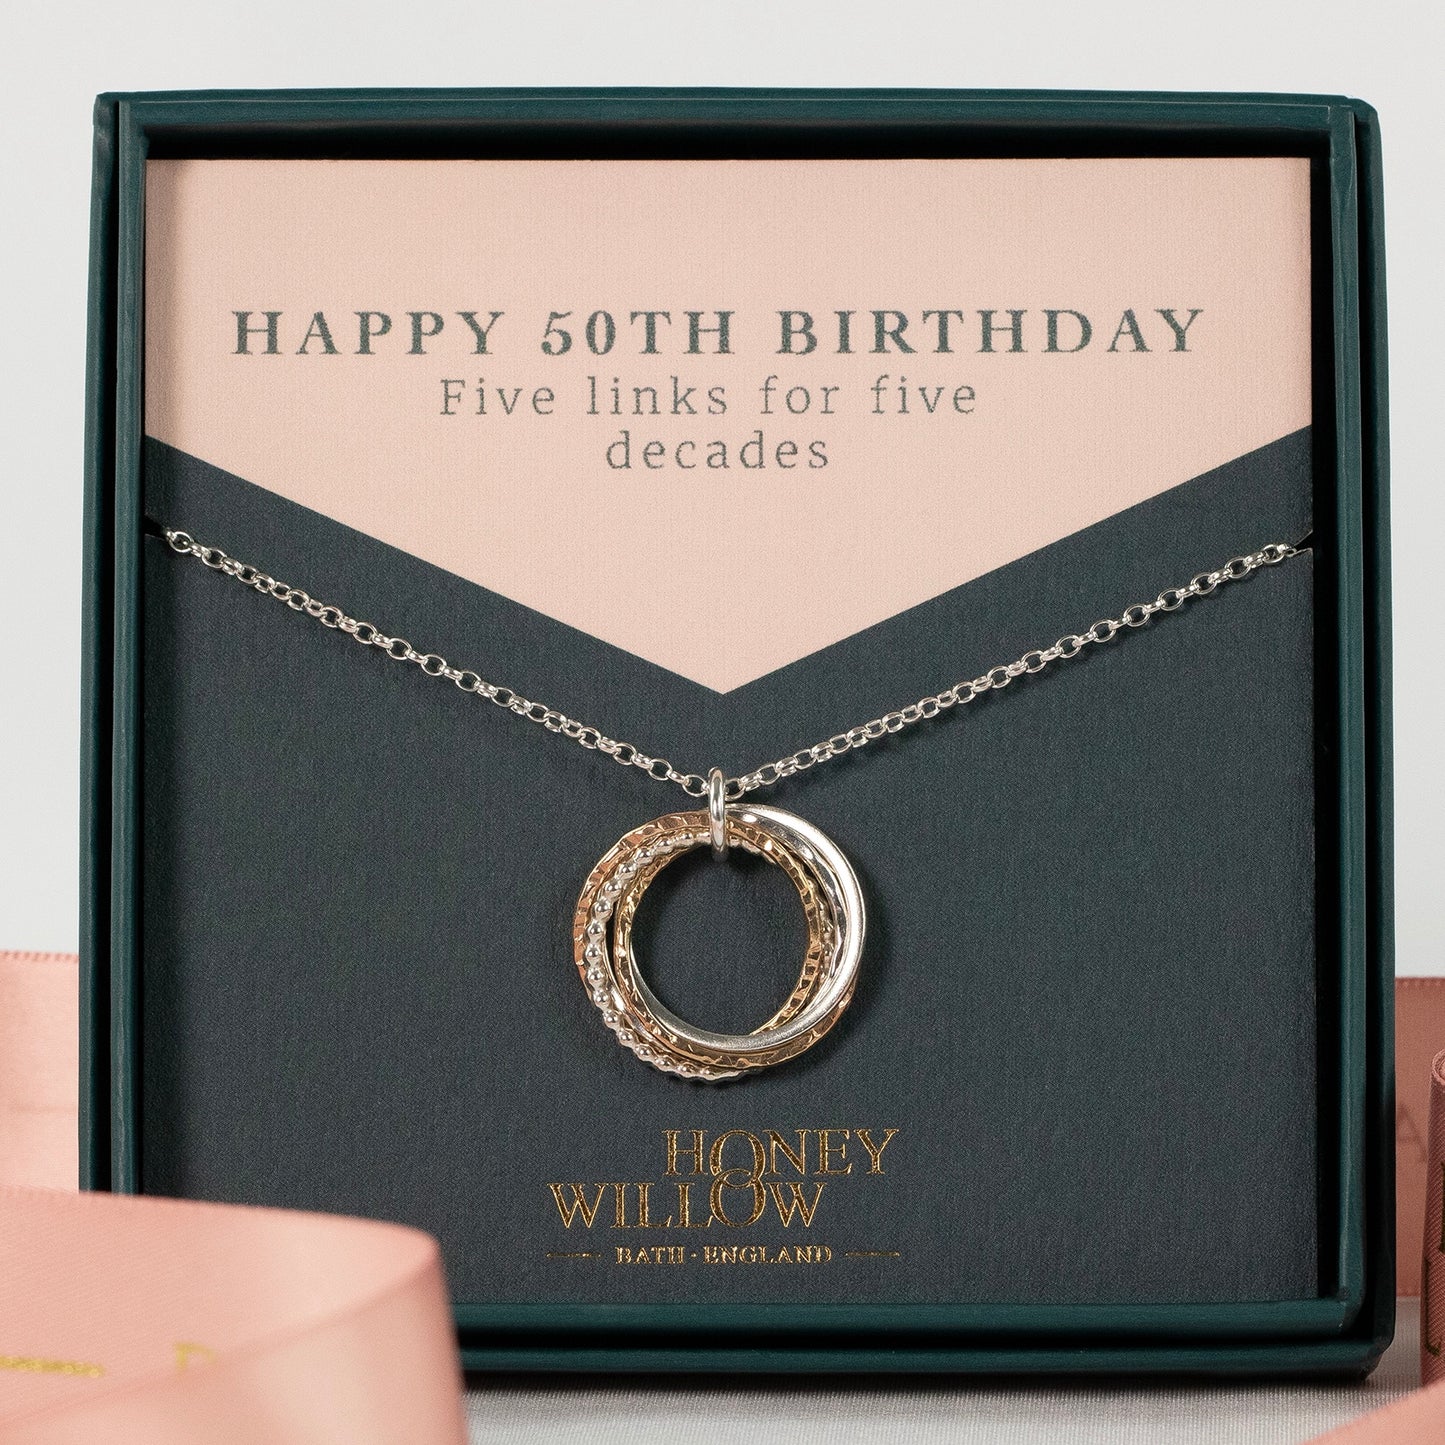 50th Birthday Necklace - The Original 5 Links for 5 Decades Necklace - Silver & Gold